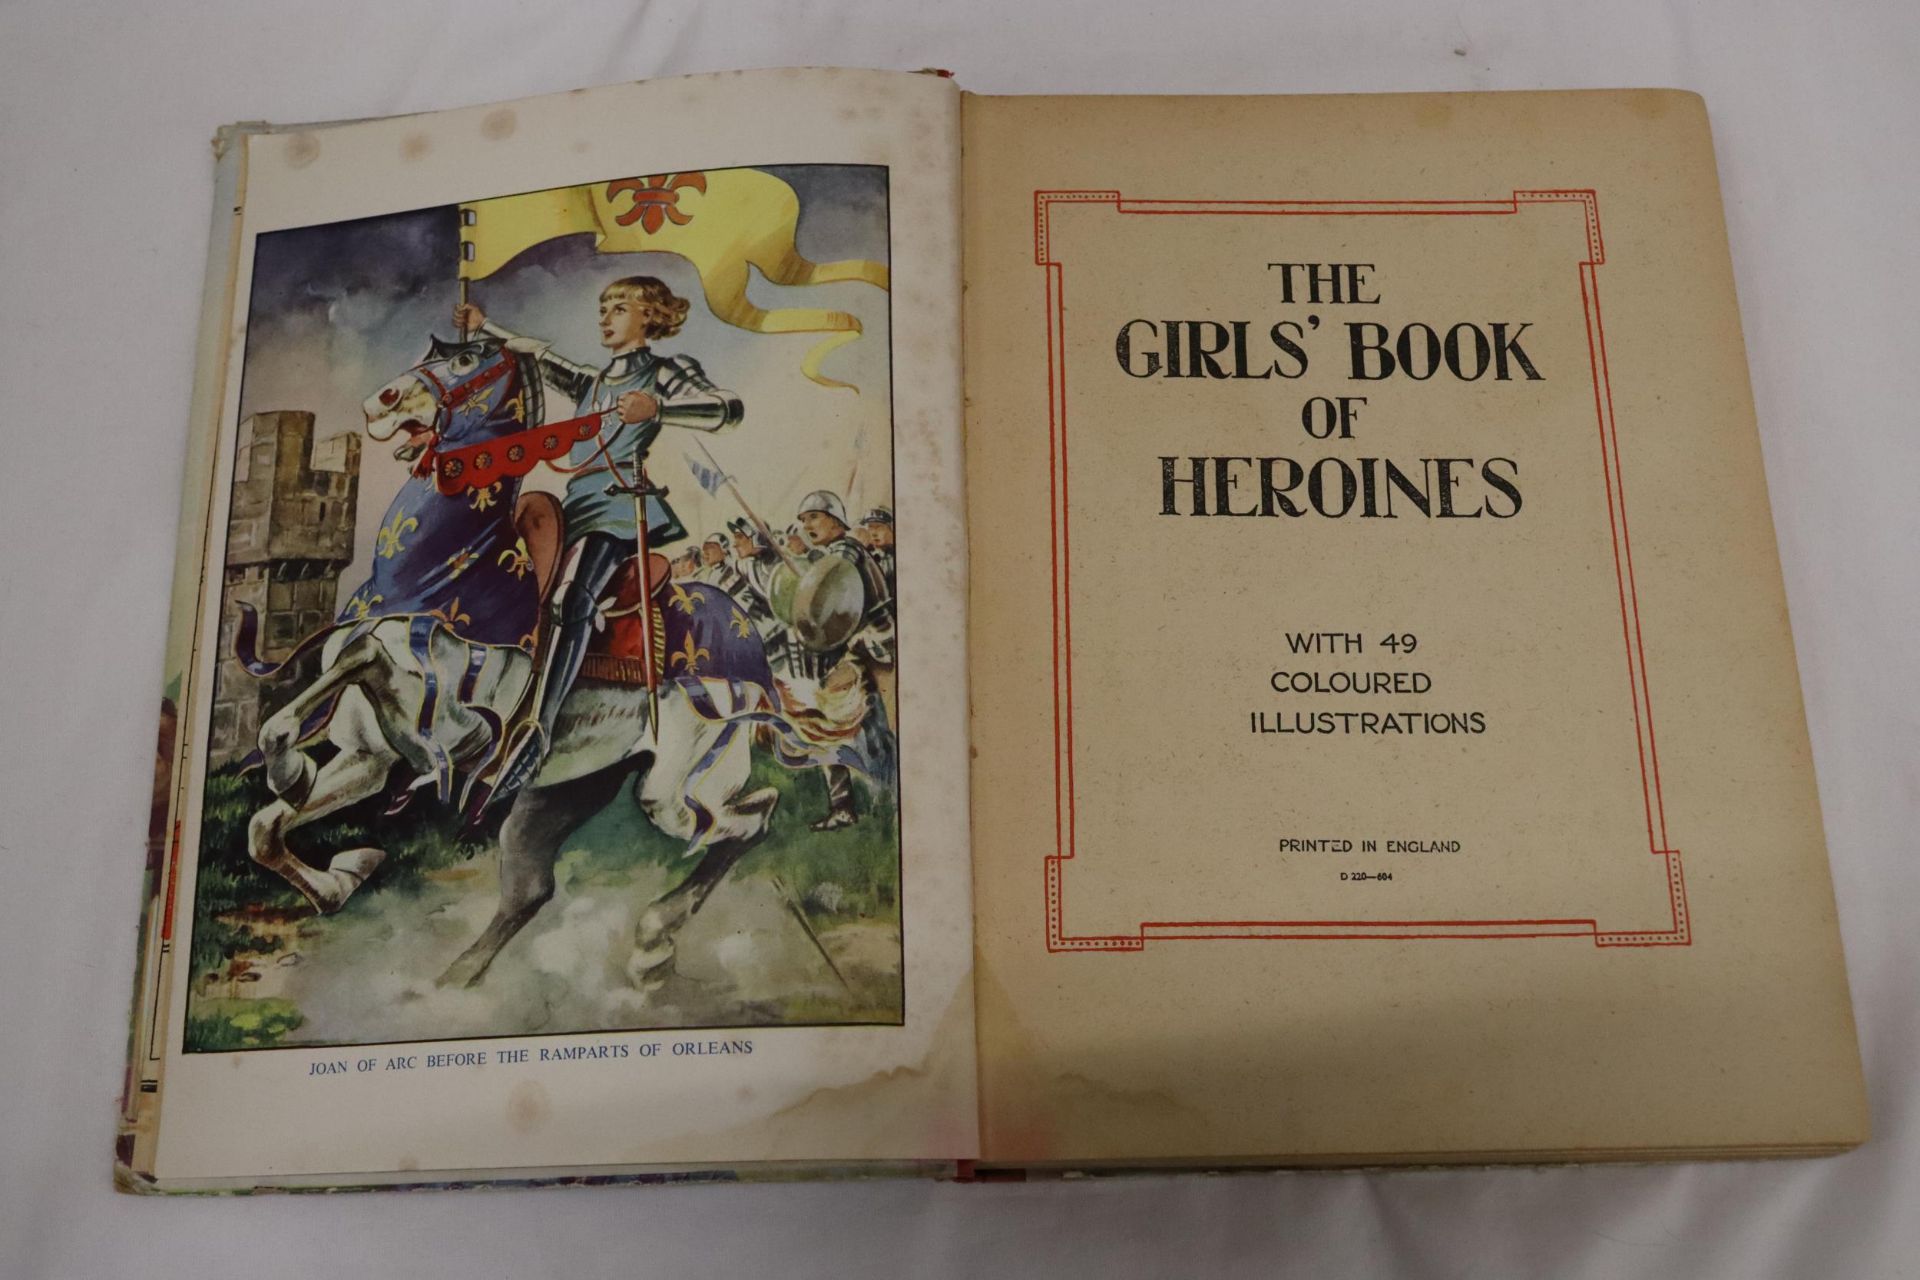 TWO VINTAGE HARDBACK CHILDREN'S BOOKS, 'THE GIRL'S BOOK OF HEROINES' AND 'LAMB'S TALES FROM - Image 7 of 8